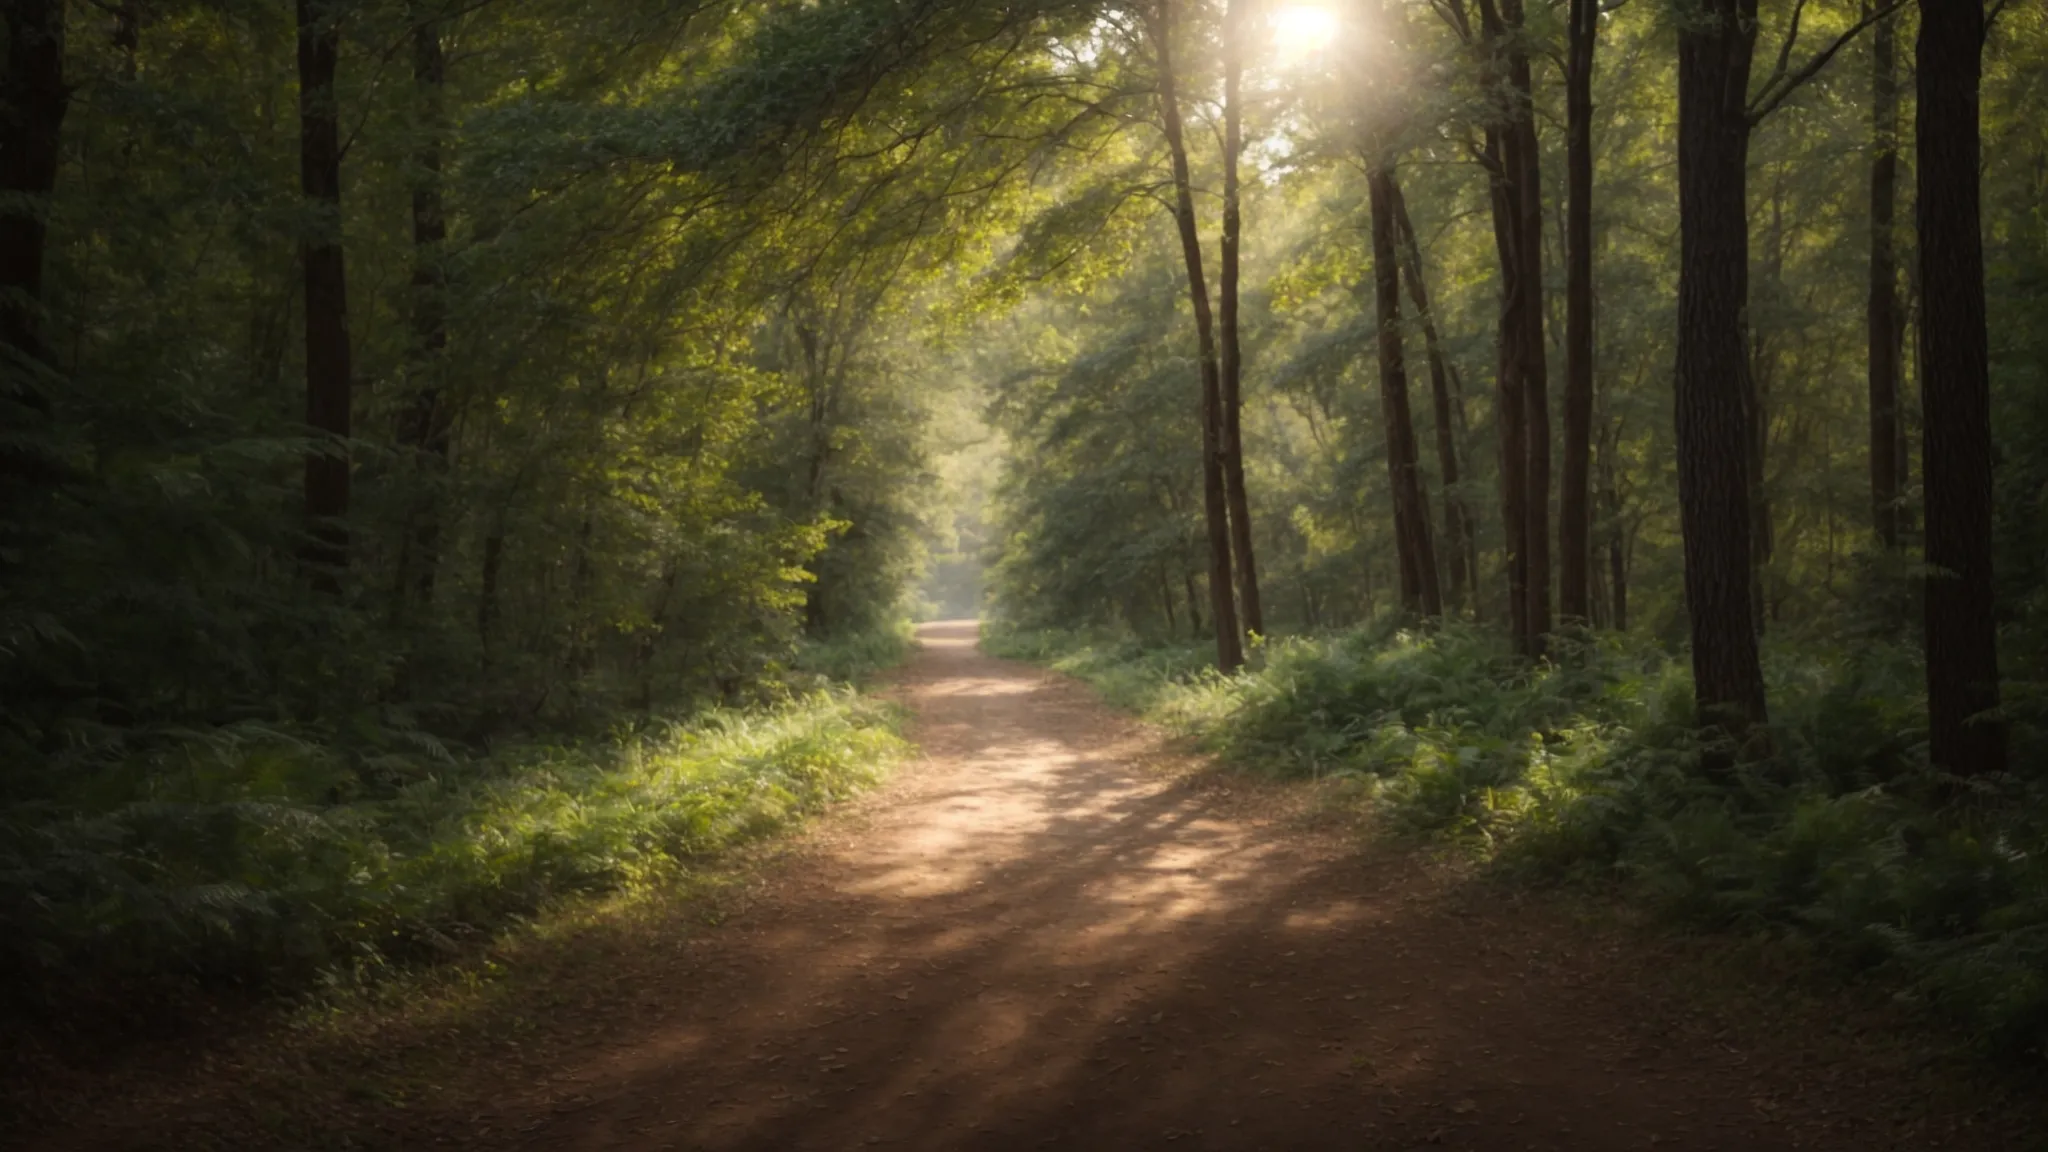 a wide, sunlit path leading through a serene, unblemished forest, symbolizing the journey toward enhancing website traffic.